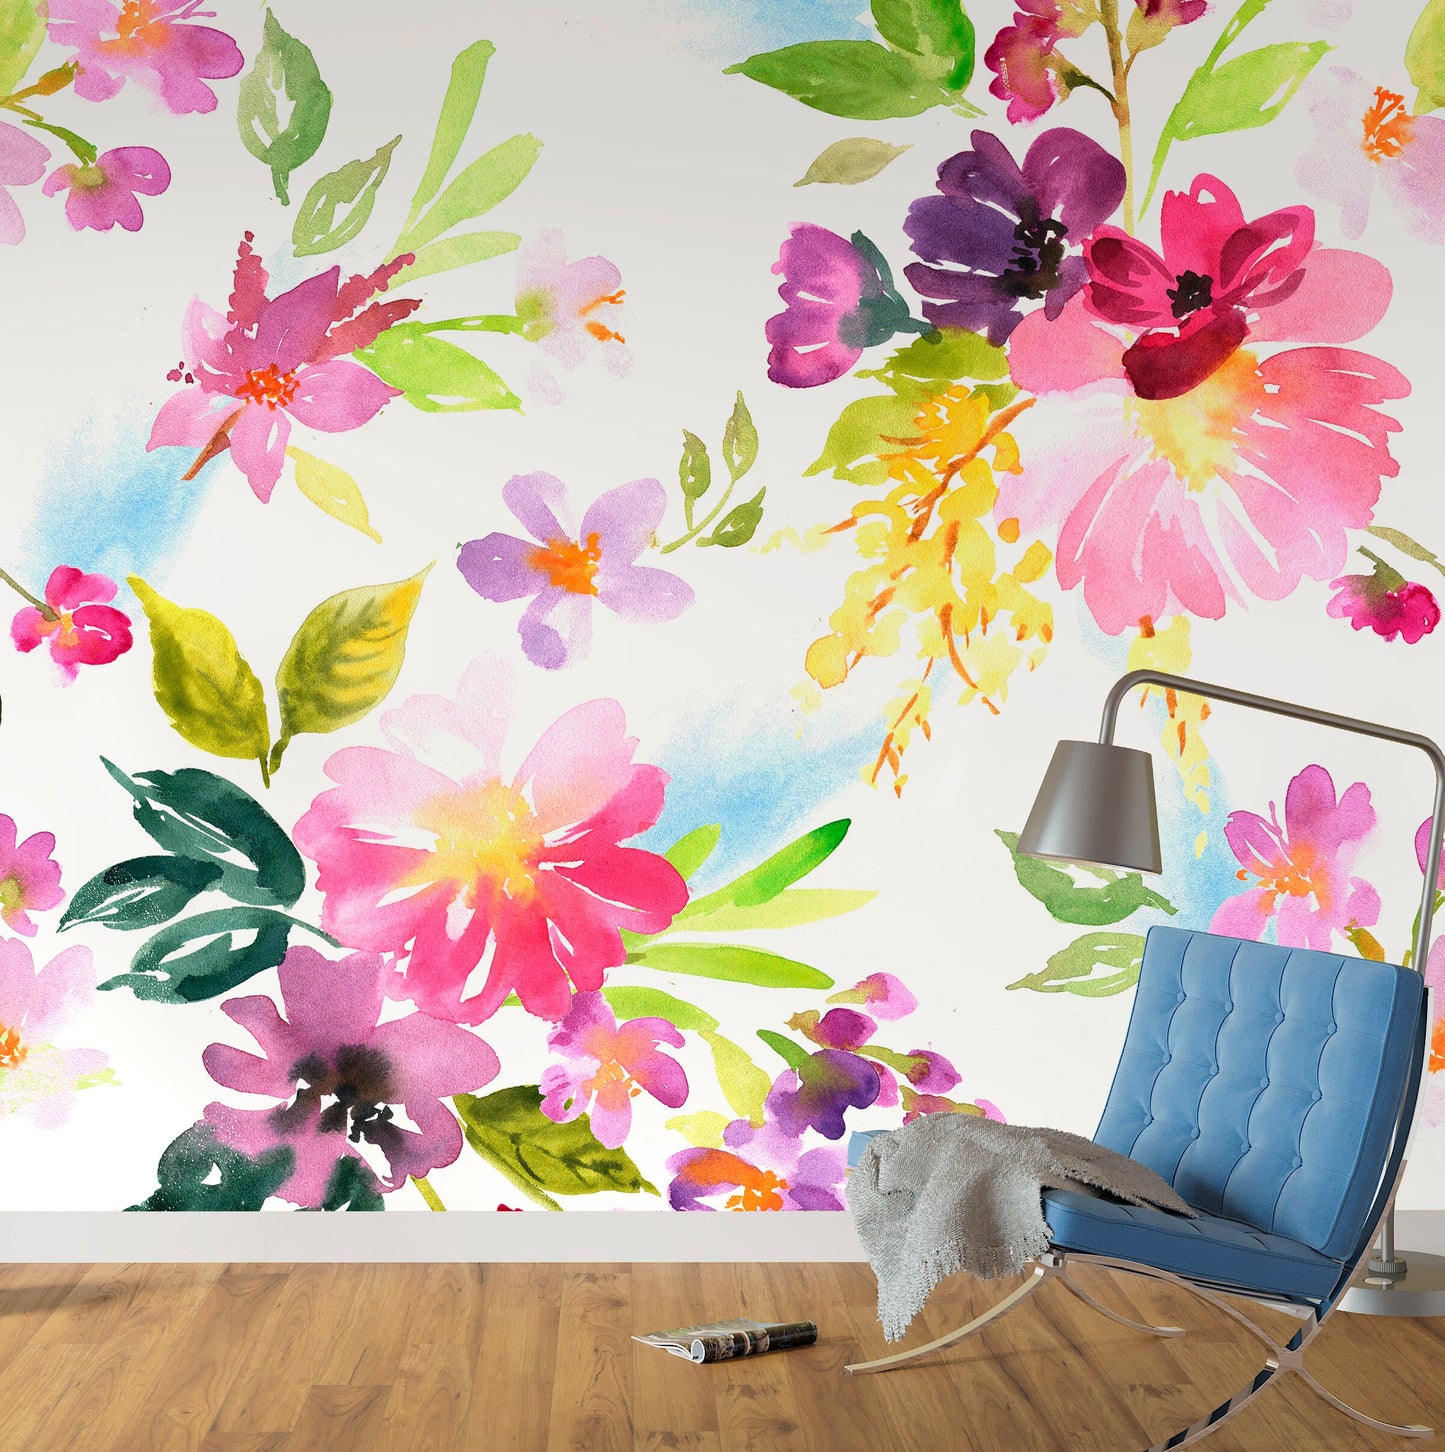 Watercolor Floral Wallpaper Peel and Stick, Big Flower Wallpaper, Removable Wall Paper